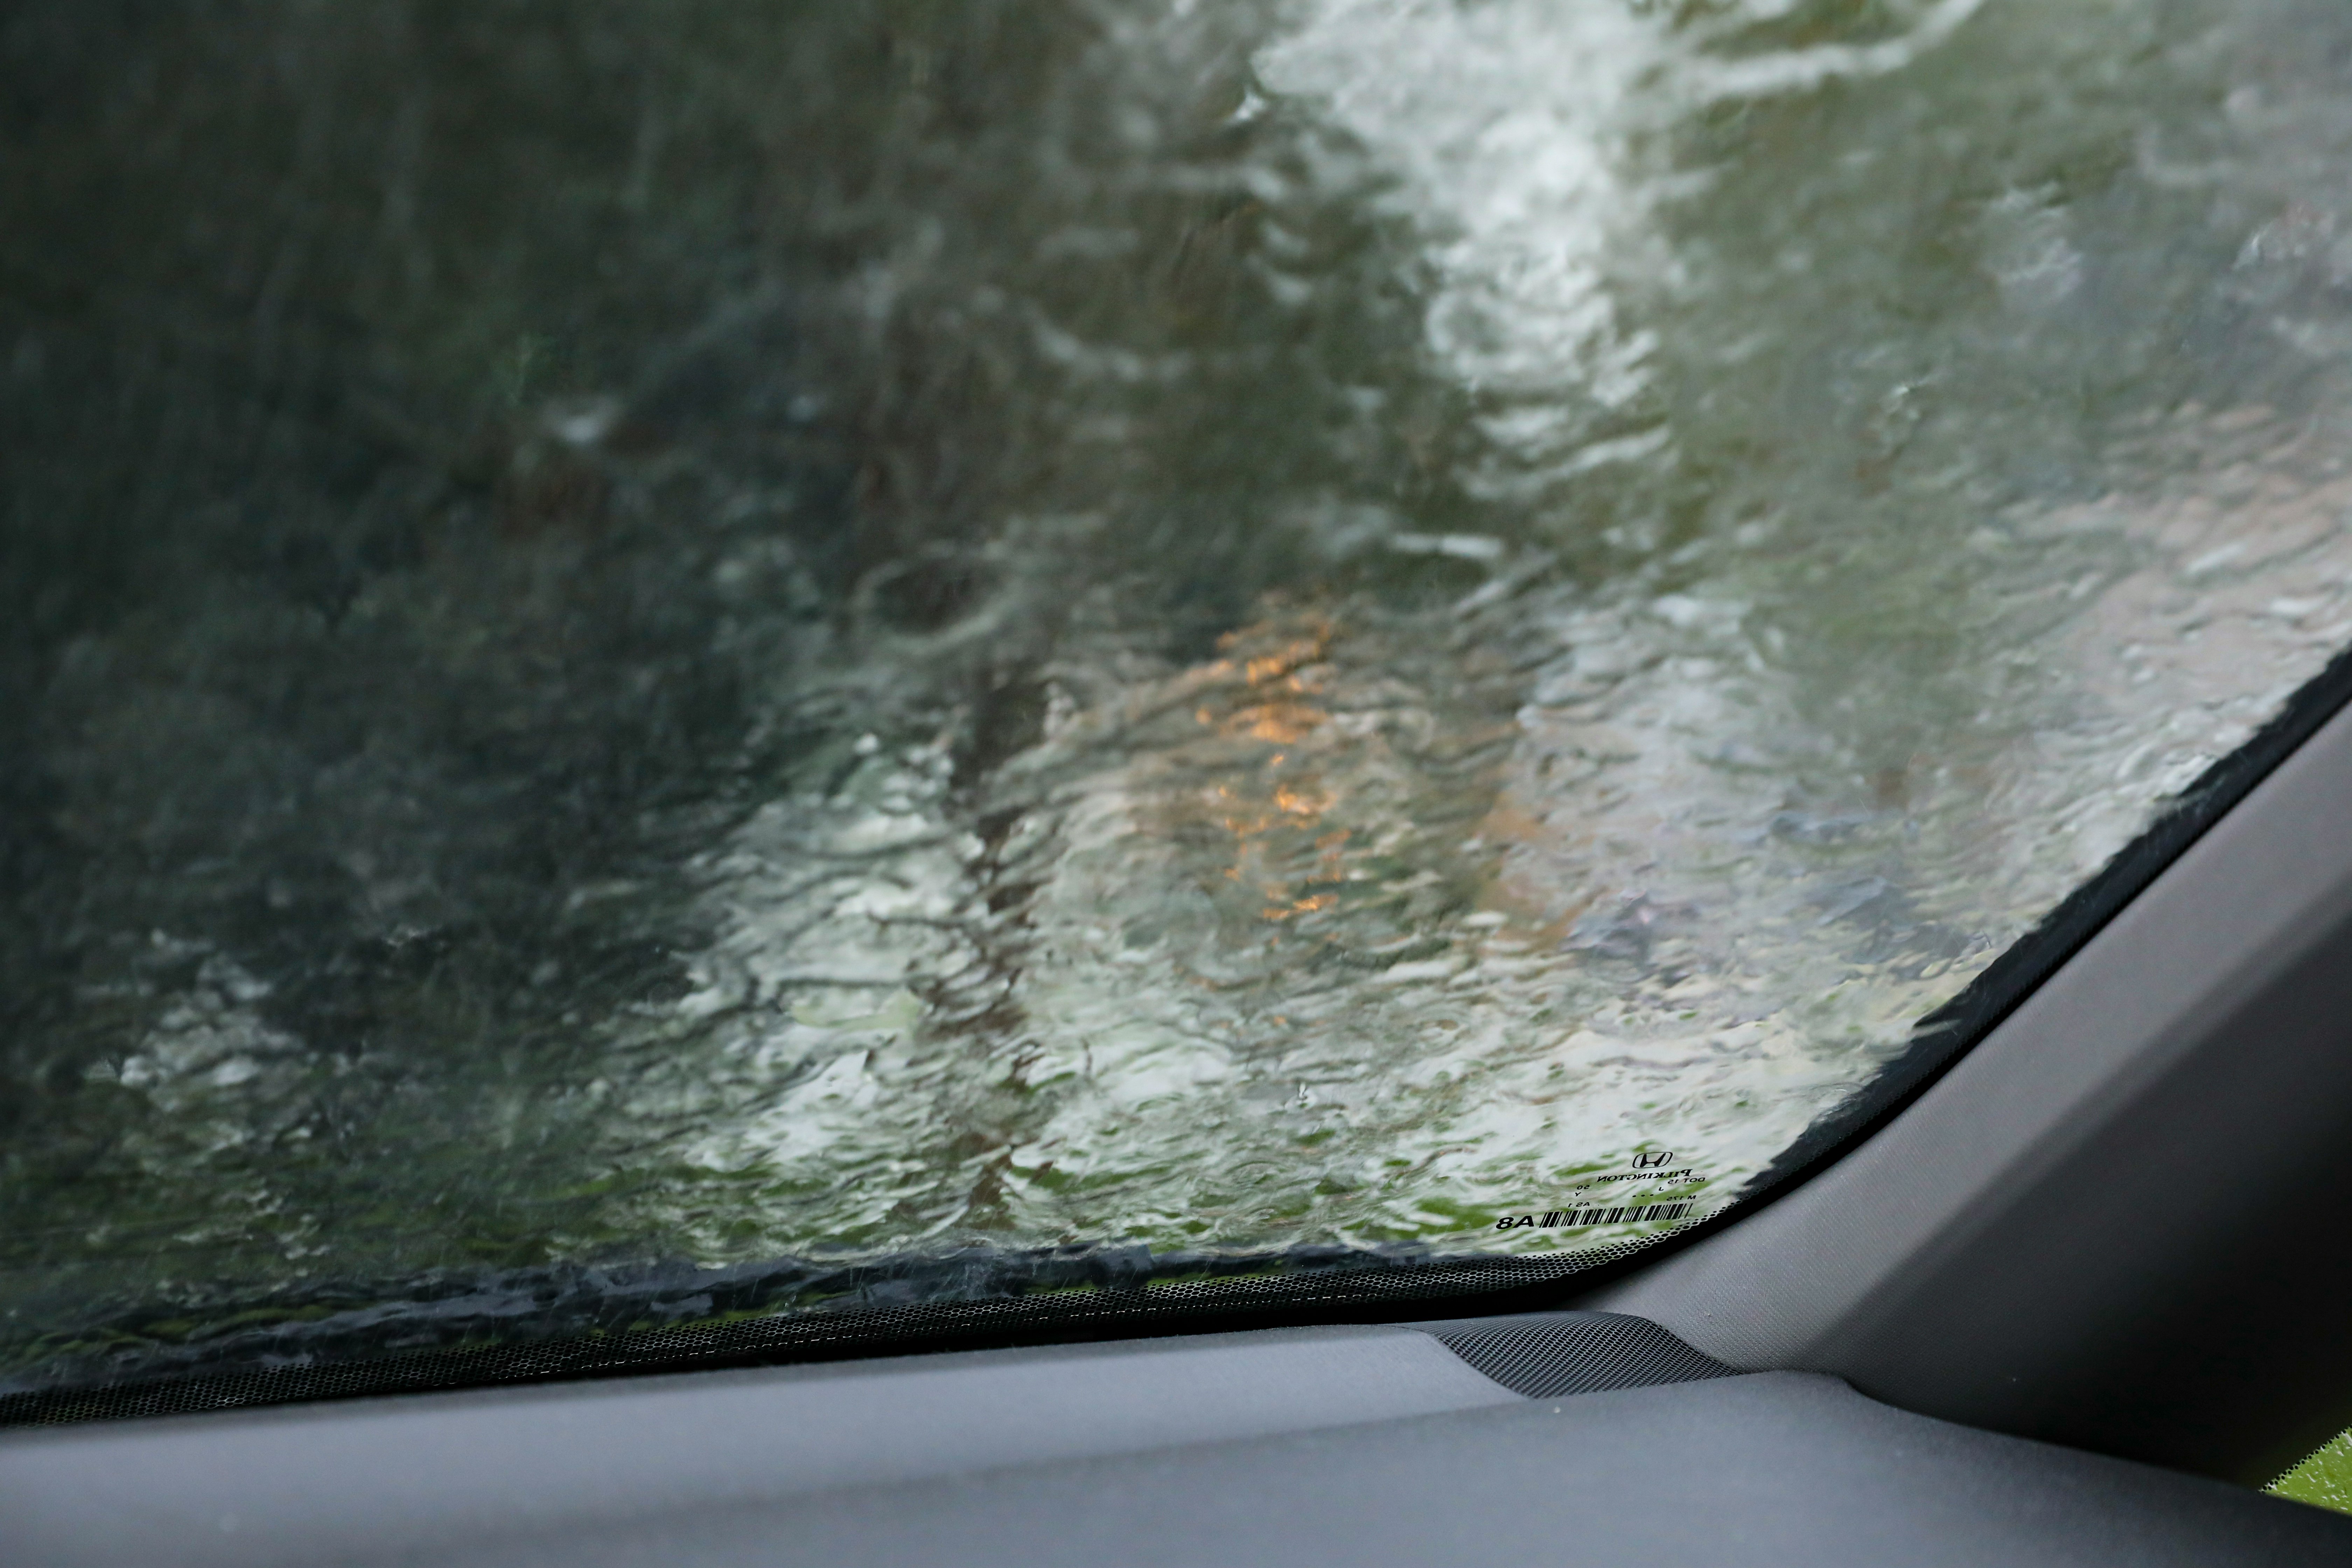 car window with water droplets